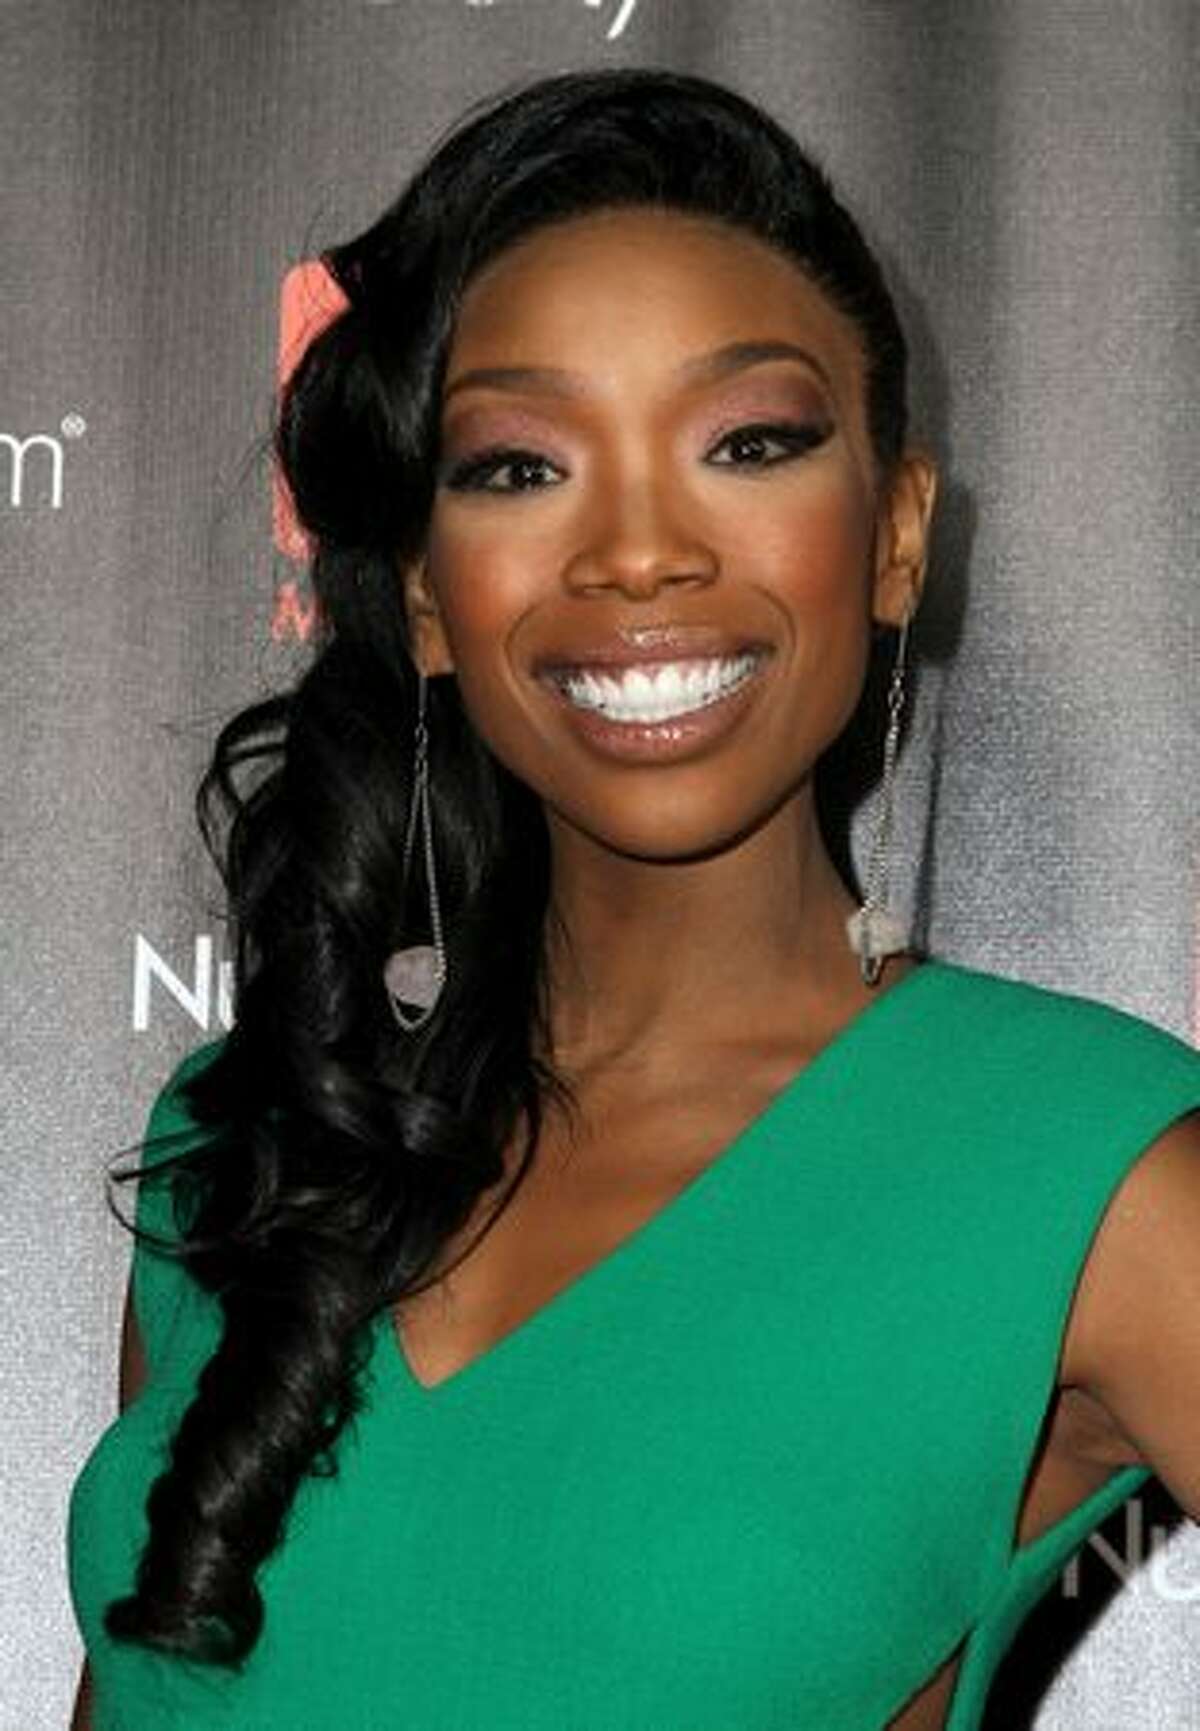 TV Celebrity Brandy arrives at TV Guide Magazine's "2010 Hot List" Party in Hollywood, California.